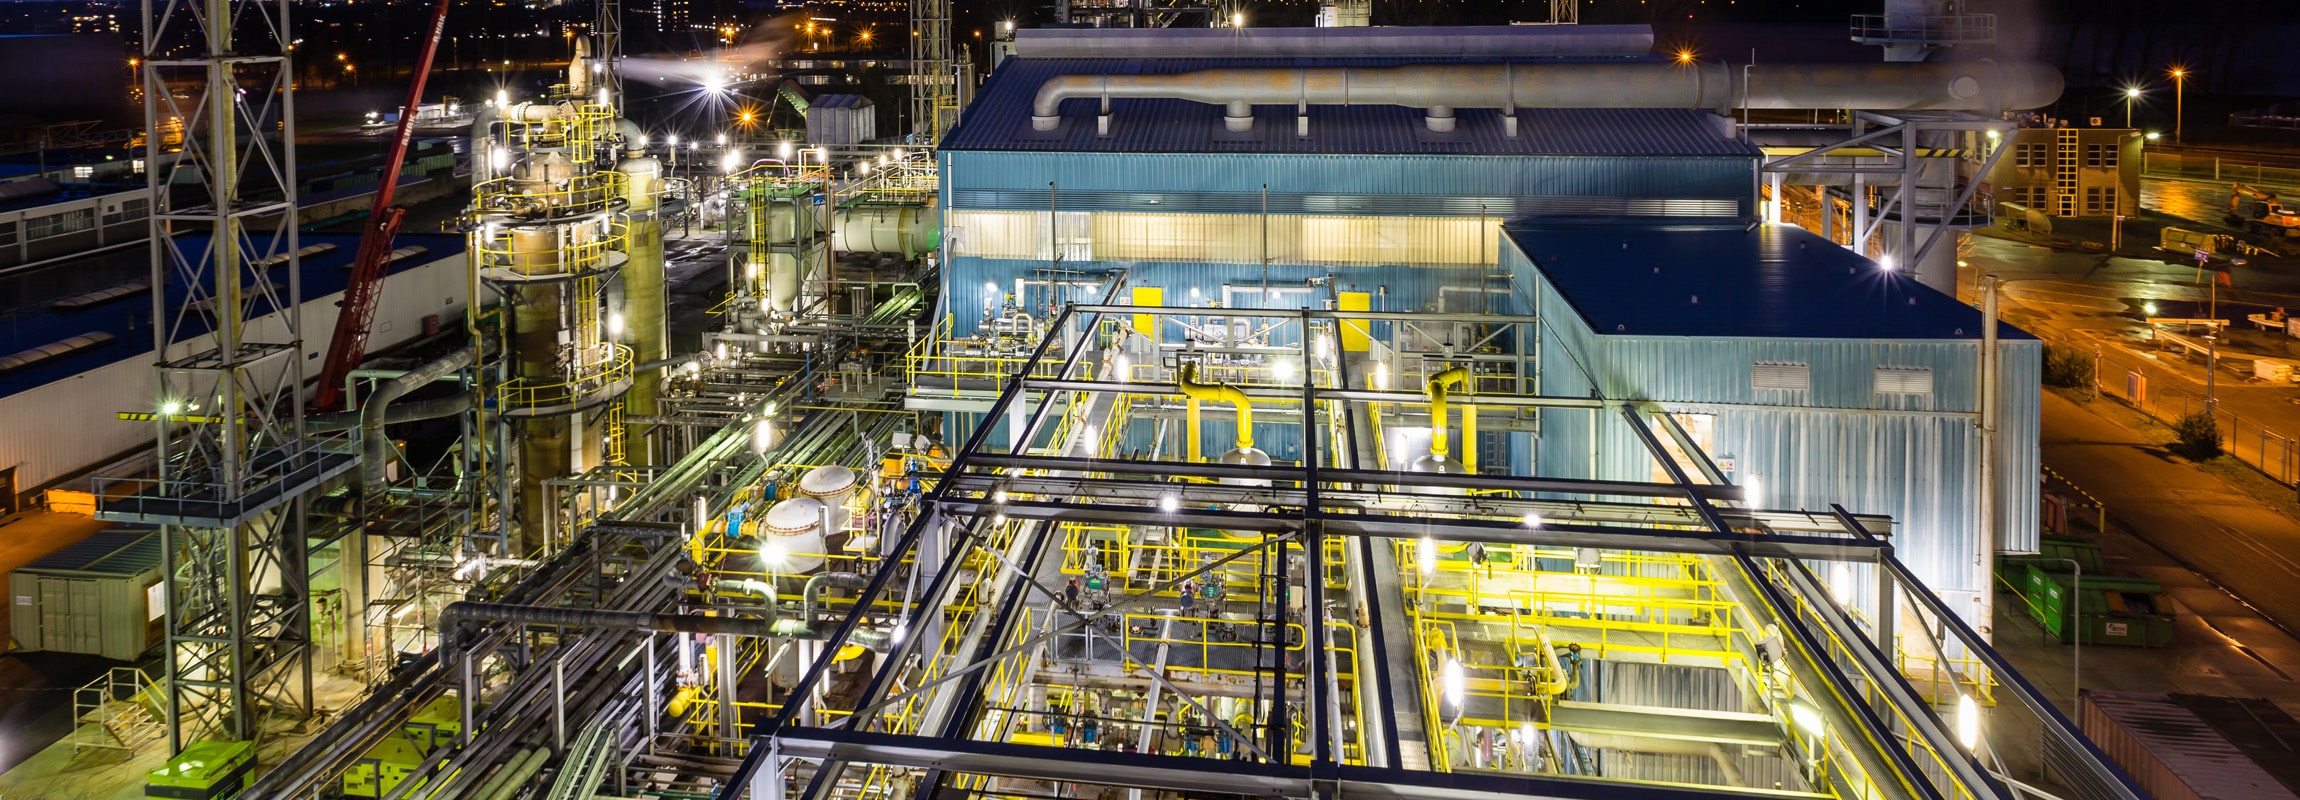 The success of Blackhall Engineering's
Cryogenic Diverter Valves at the
Edmonton Project